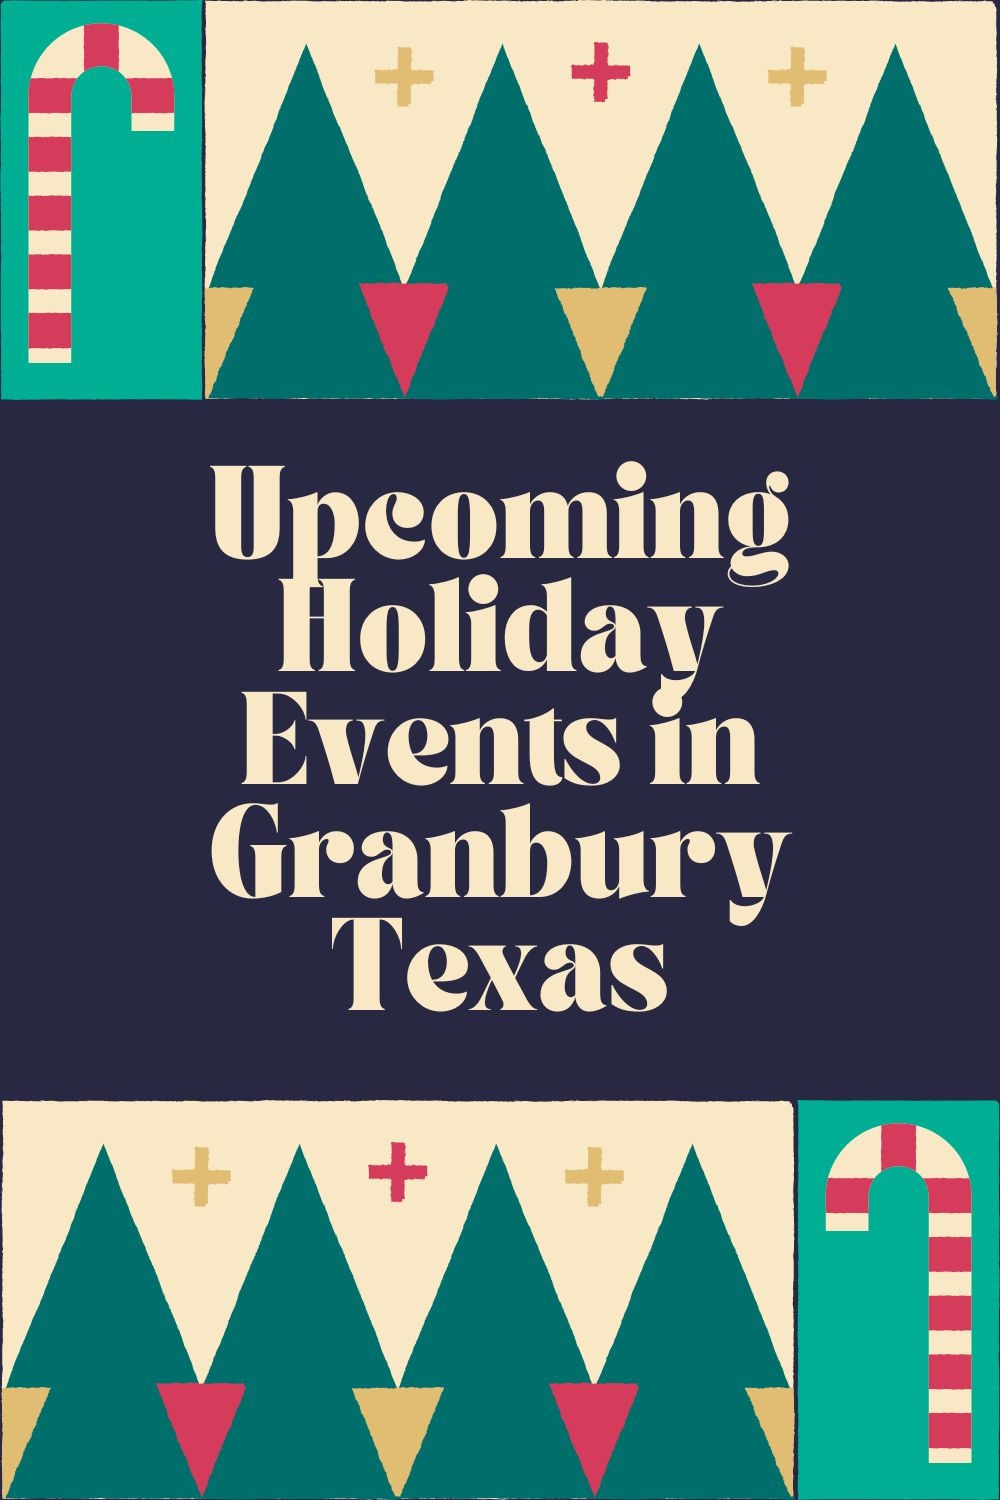 Holiday Events in Granbury Texas